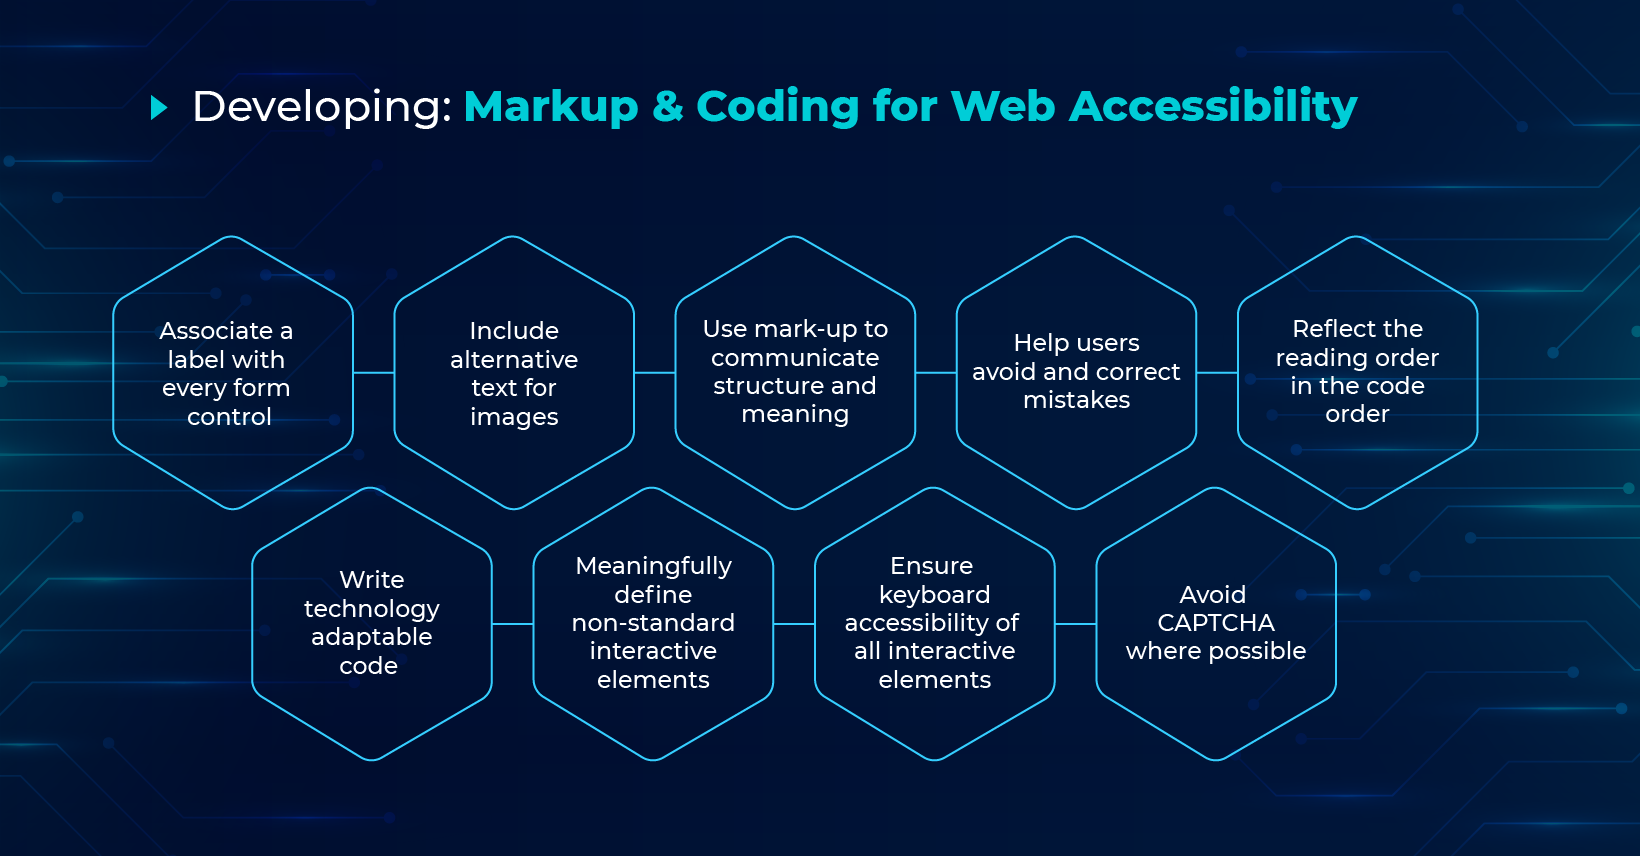 Developing: Markup & Coding for Web Accessibility